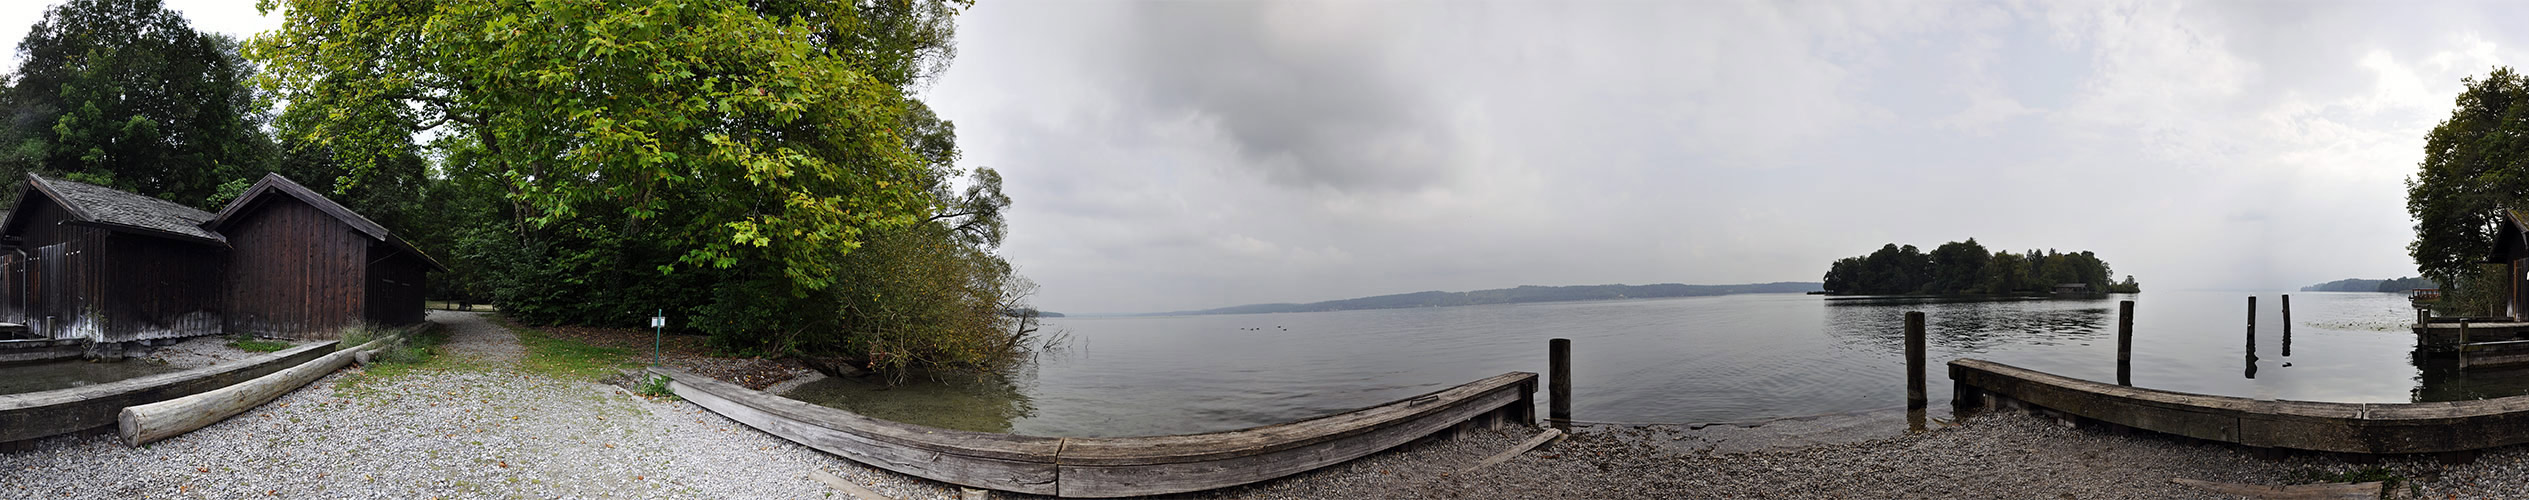 Starberger See